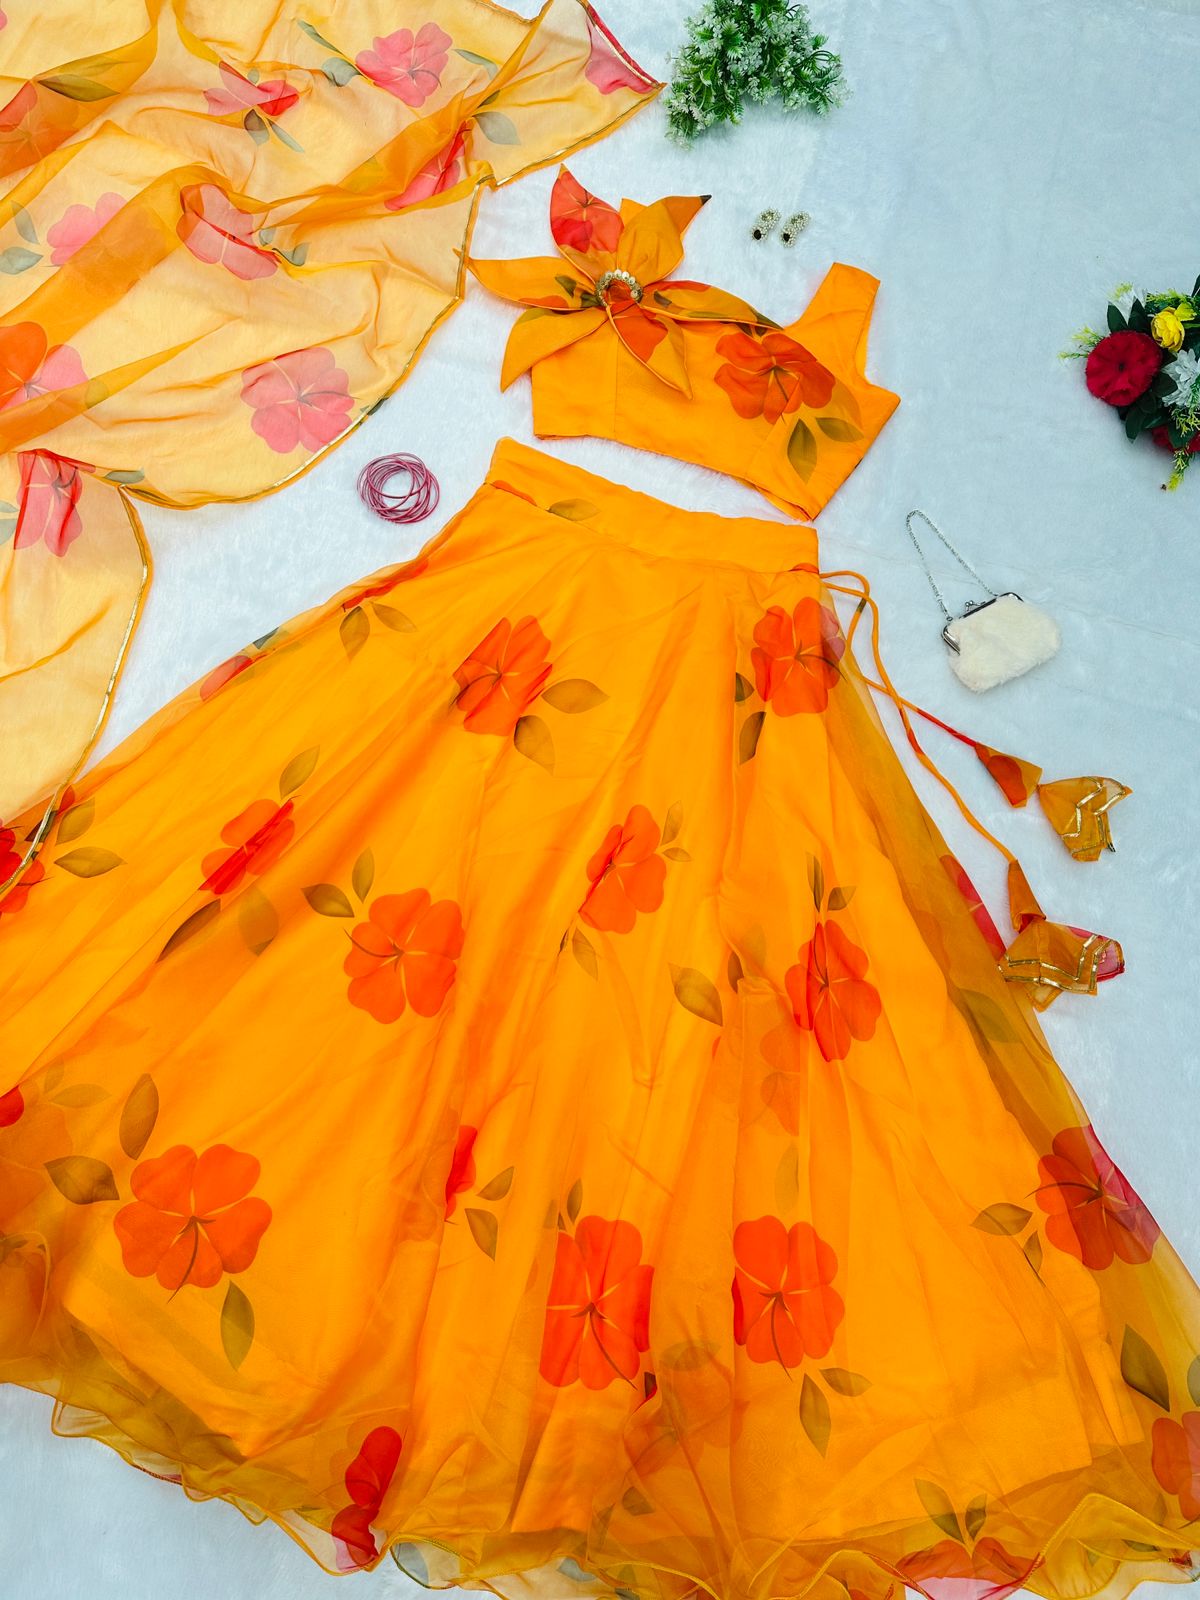 Yellow Color Organza Lehenga With Flower Pattern Blouse